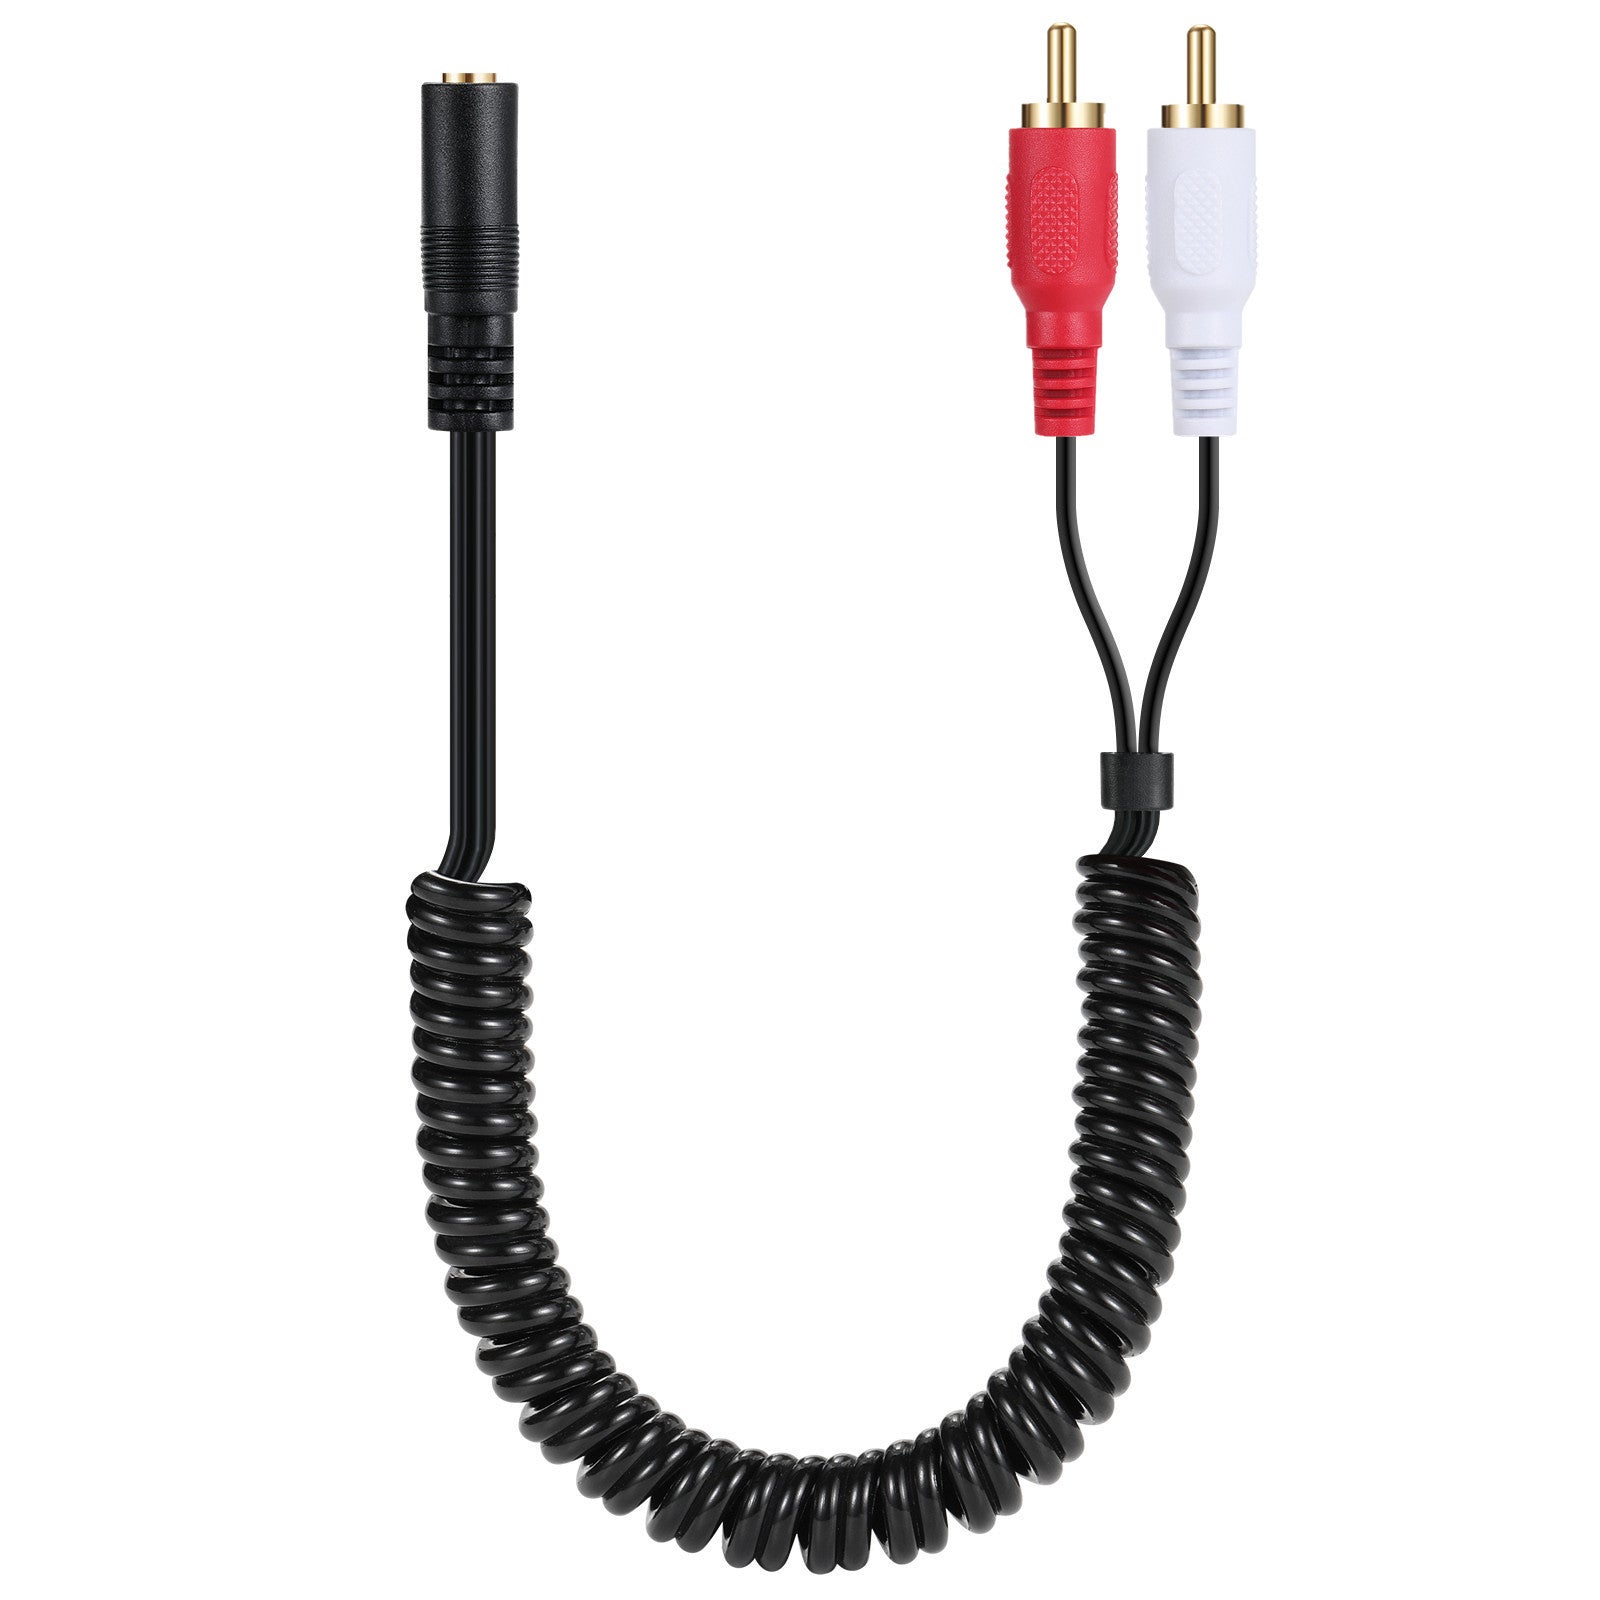 3.5mm Aux Jack Female to 2 RCA Male Audio Splitter Cable